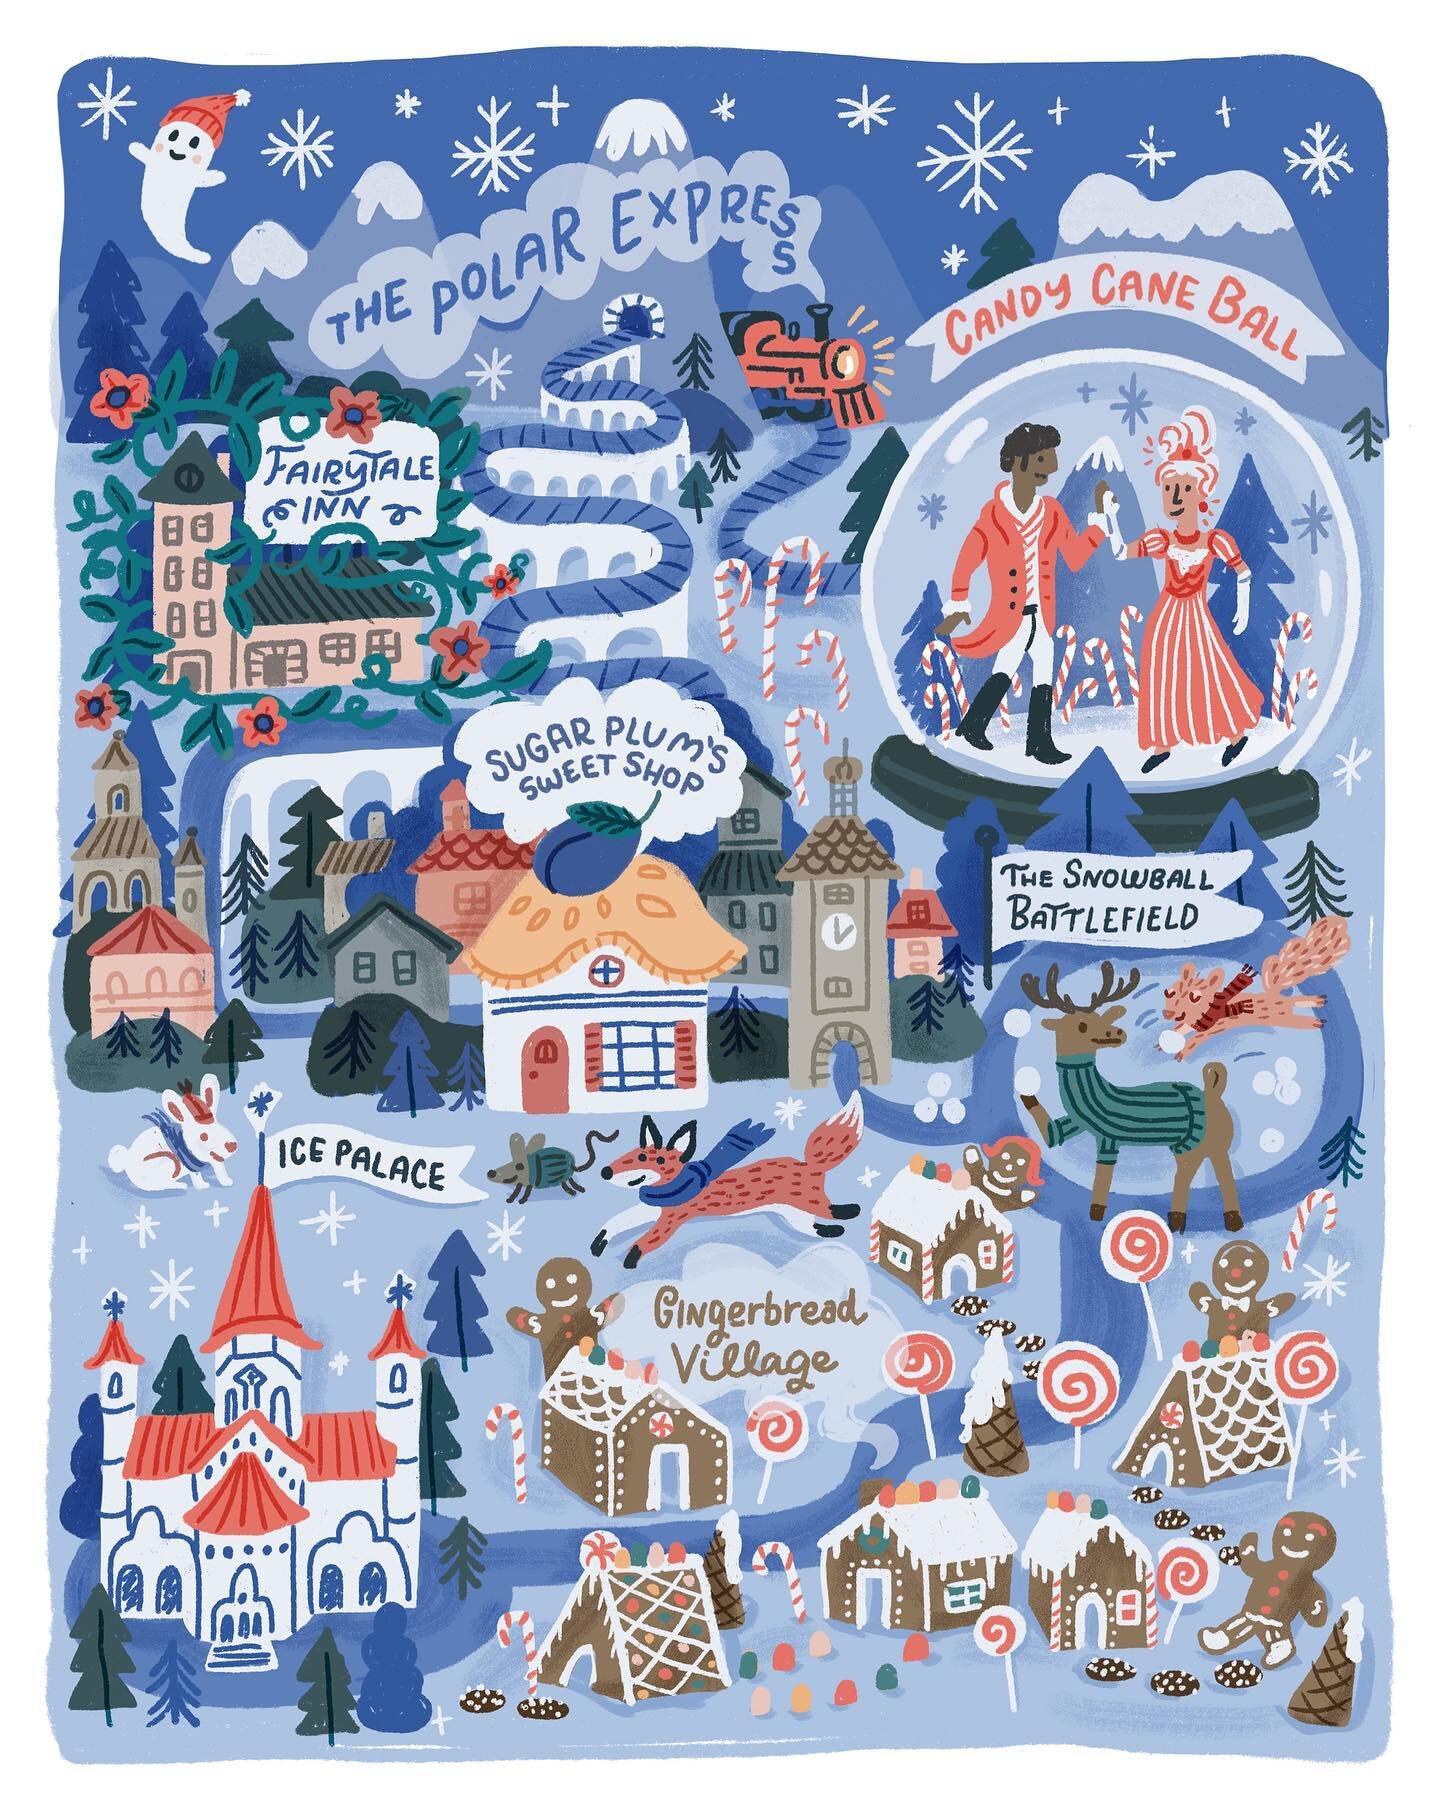 Excited to share another awesome collaboration with @alexandra_roselyn! I really love seeing everyone&rsquo;s book selections for the Readathon when the map gets posted. I wanted to capture a storybook vibe so I looked at small European towns and hal